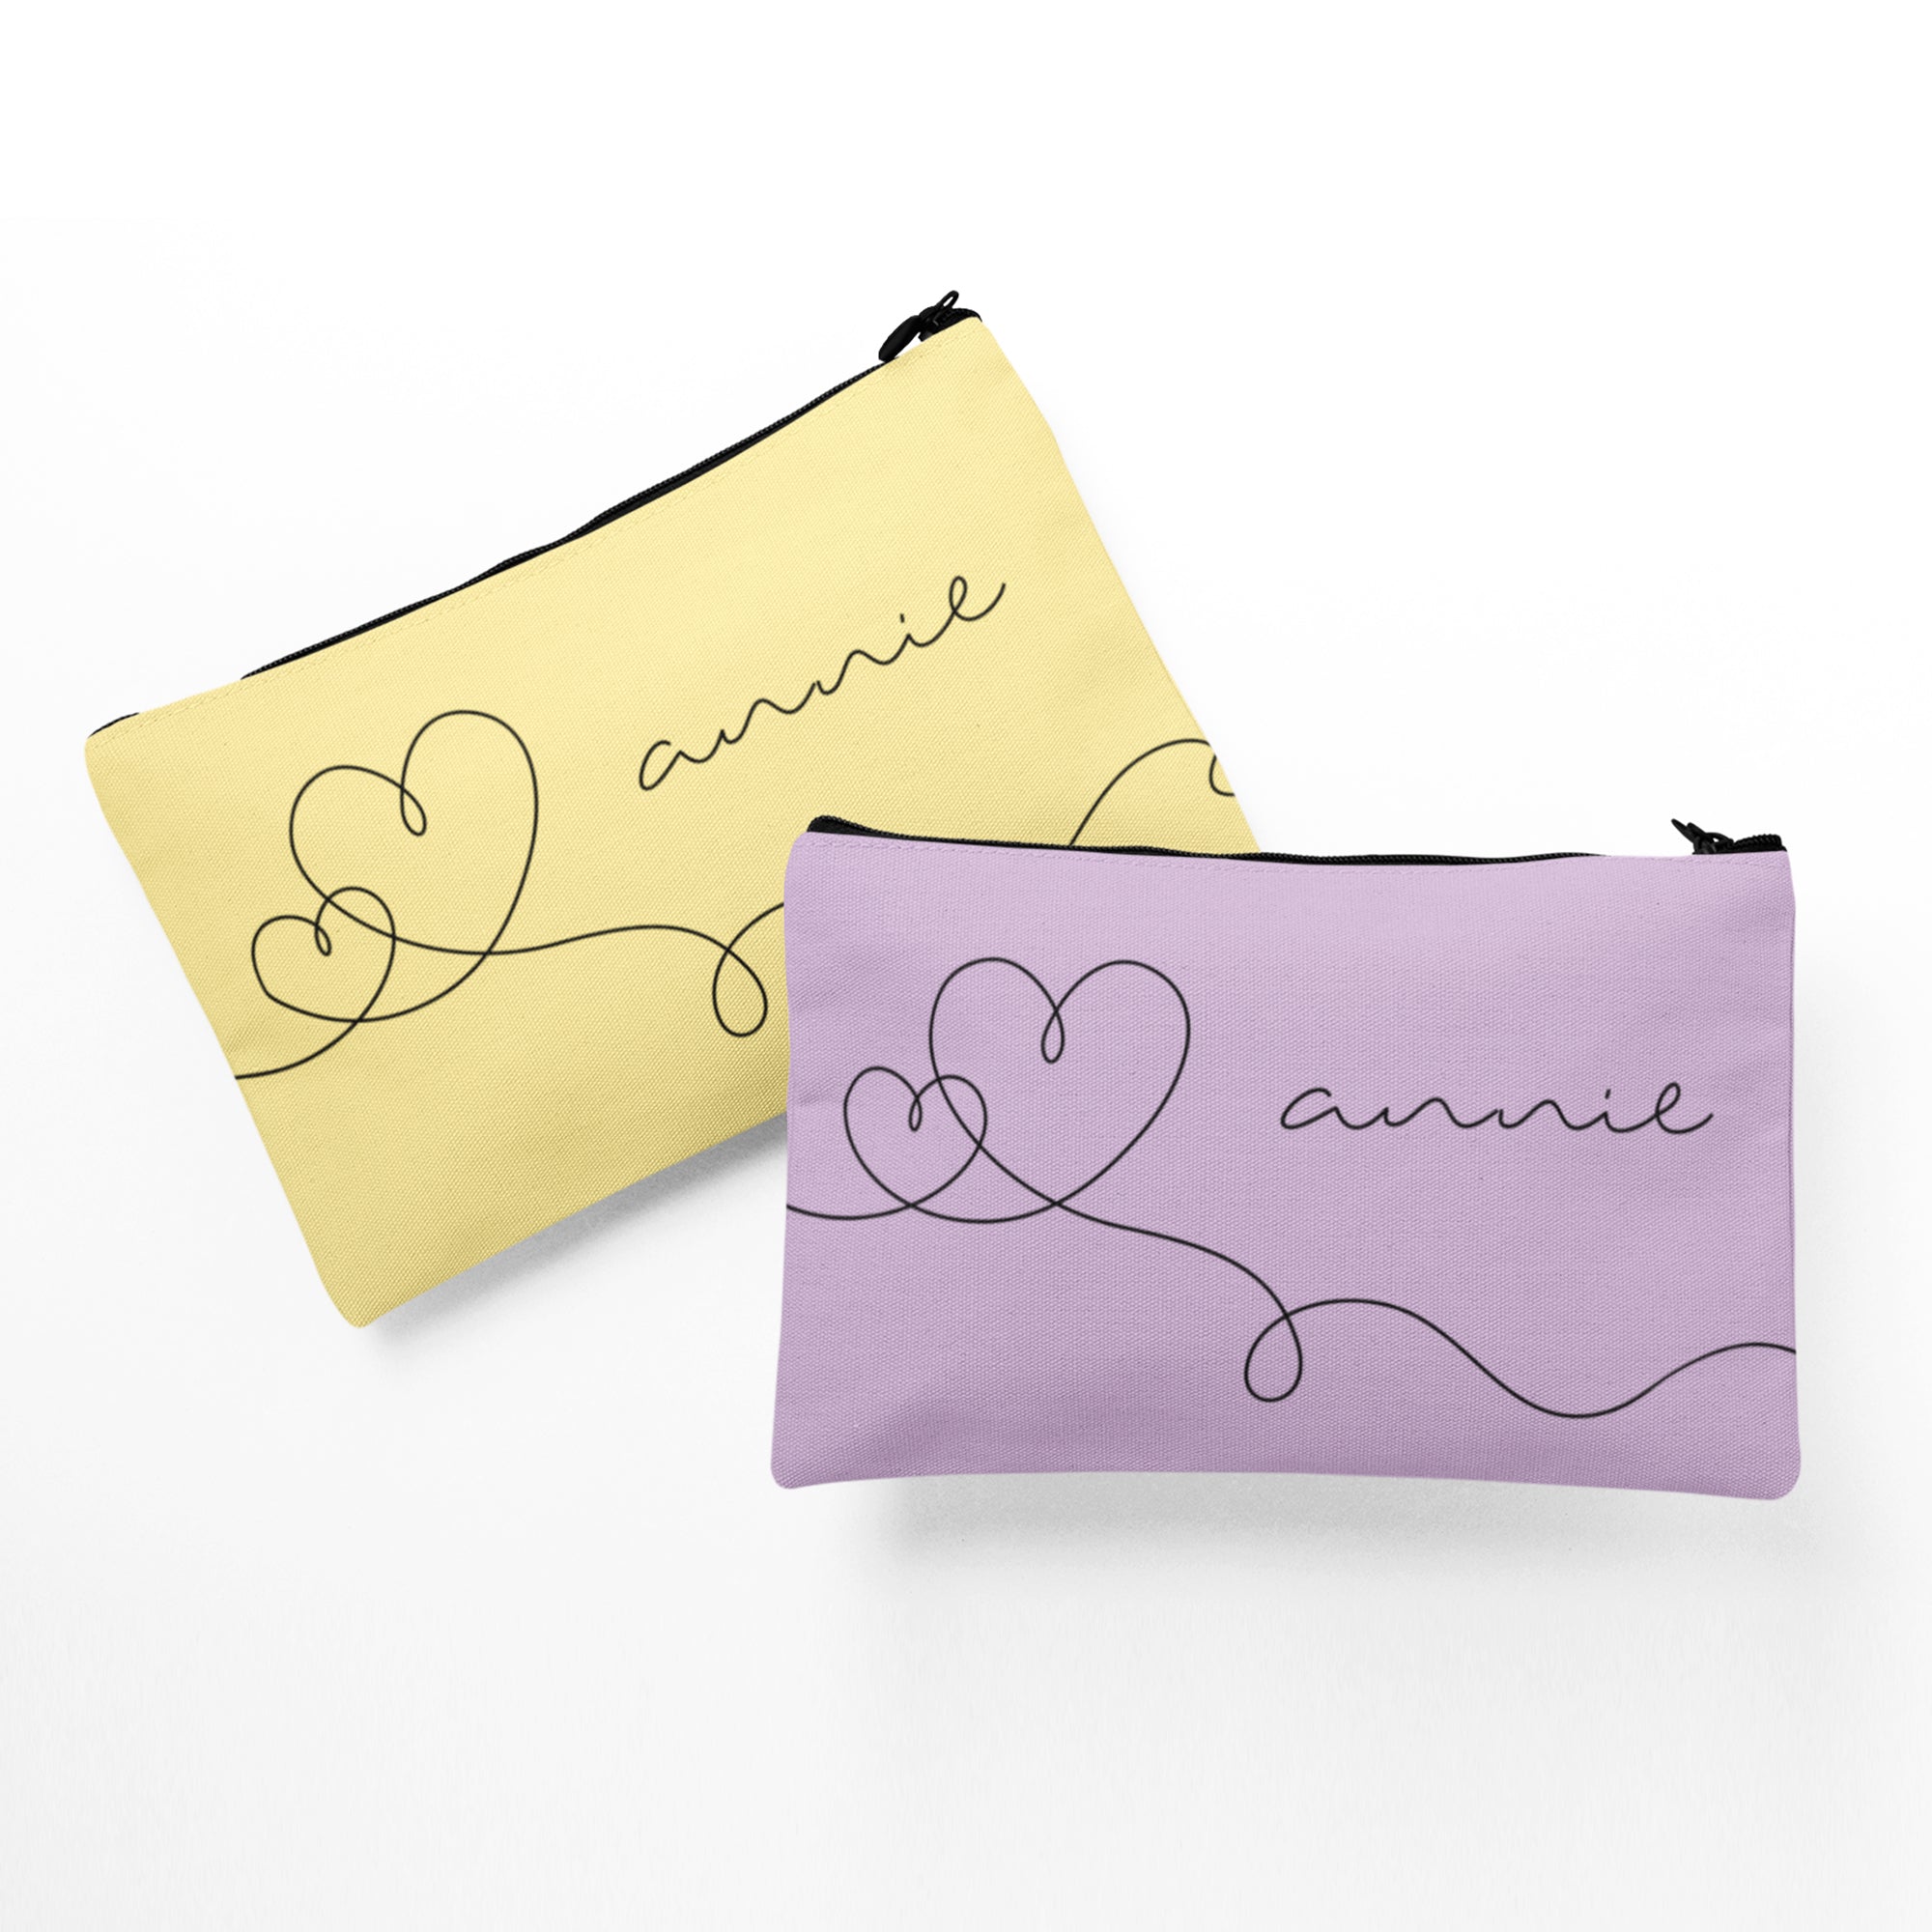 Personalized Heart Cosmetic Bag